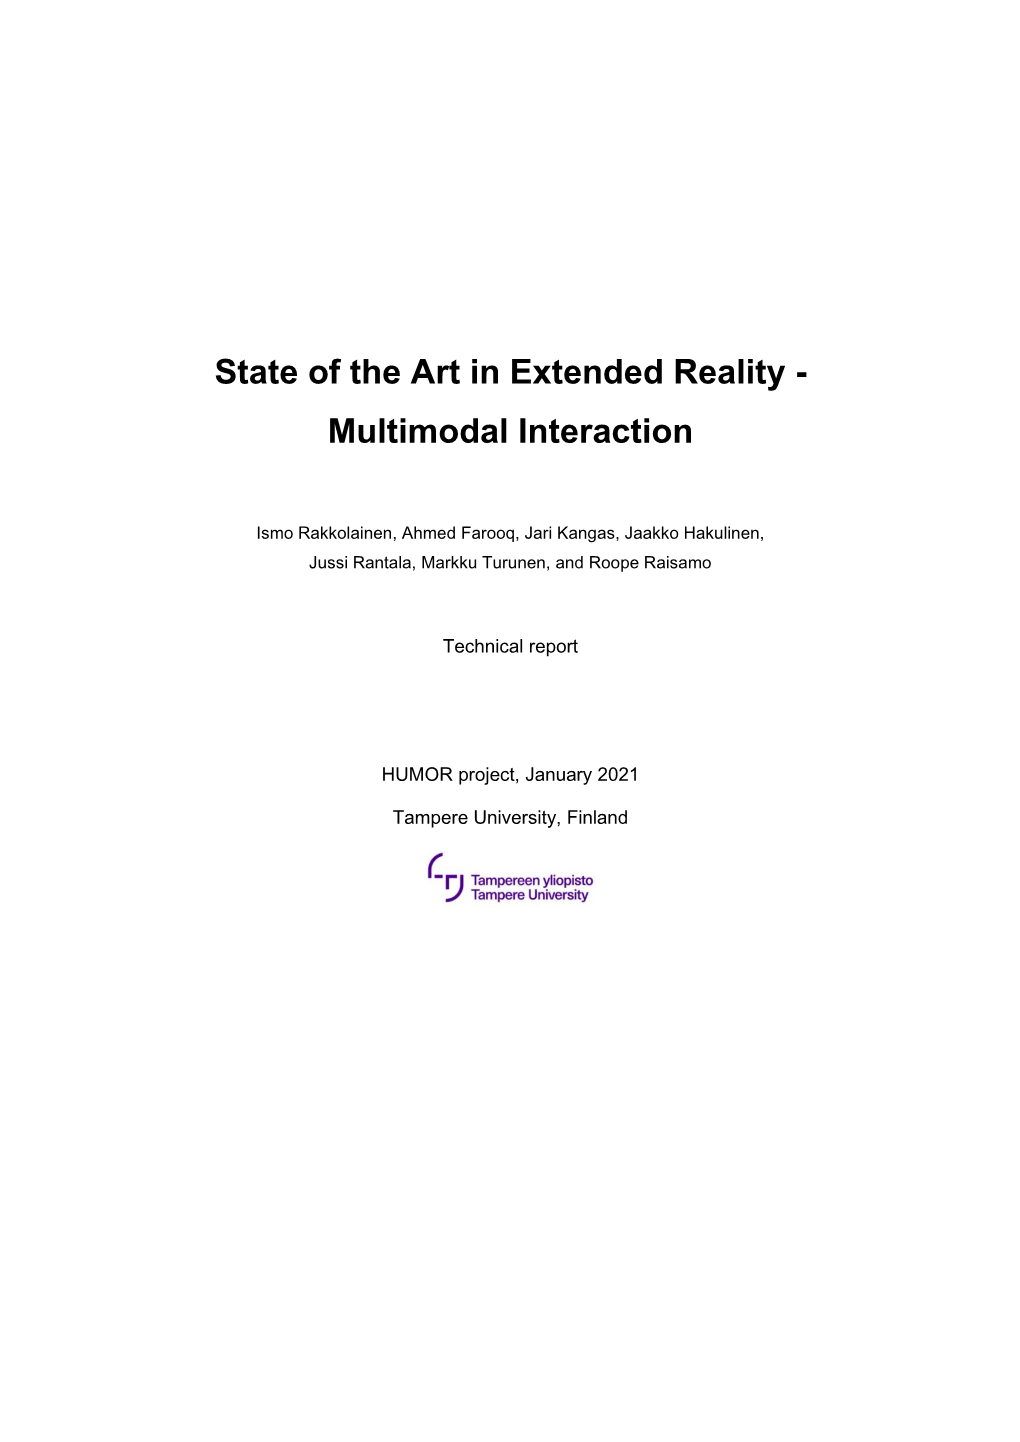 State of the Art in Extended Reality - Multimodal Interaction